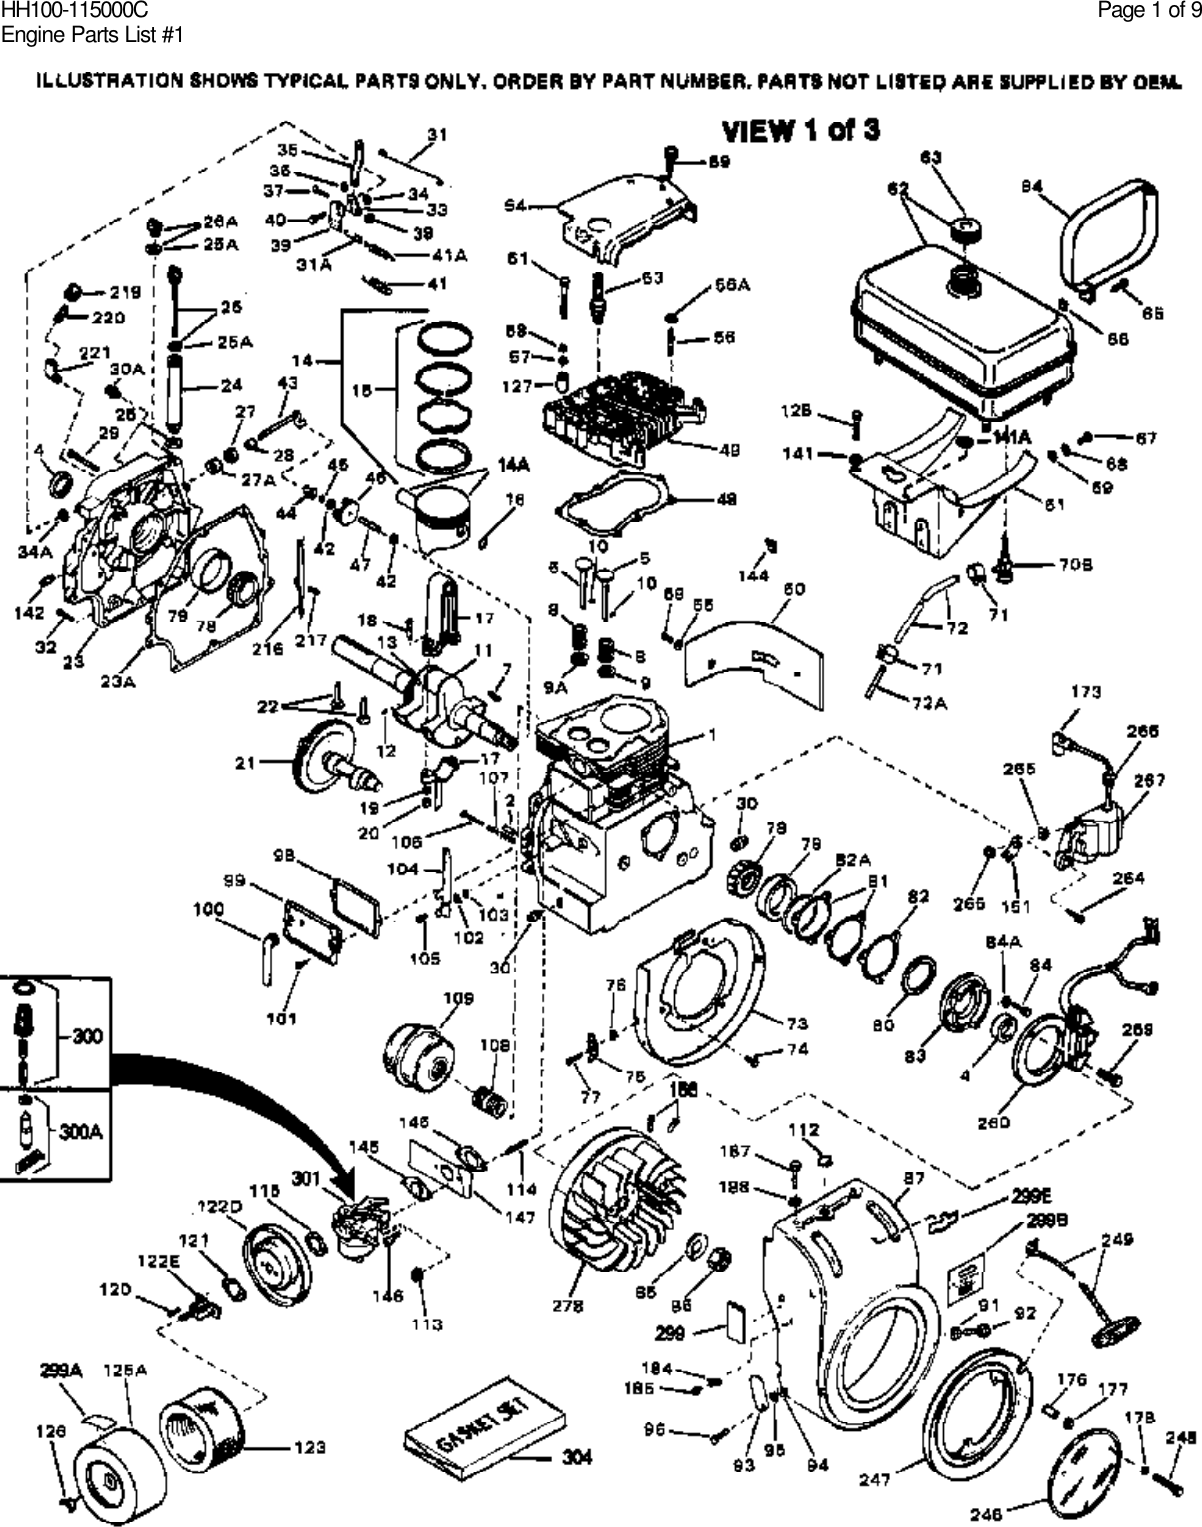 Page 1 of 9 - Diagram And/or PartsList Tecumseh HH100-115000C Parts List